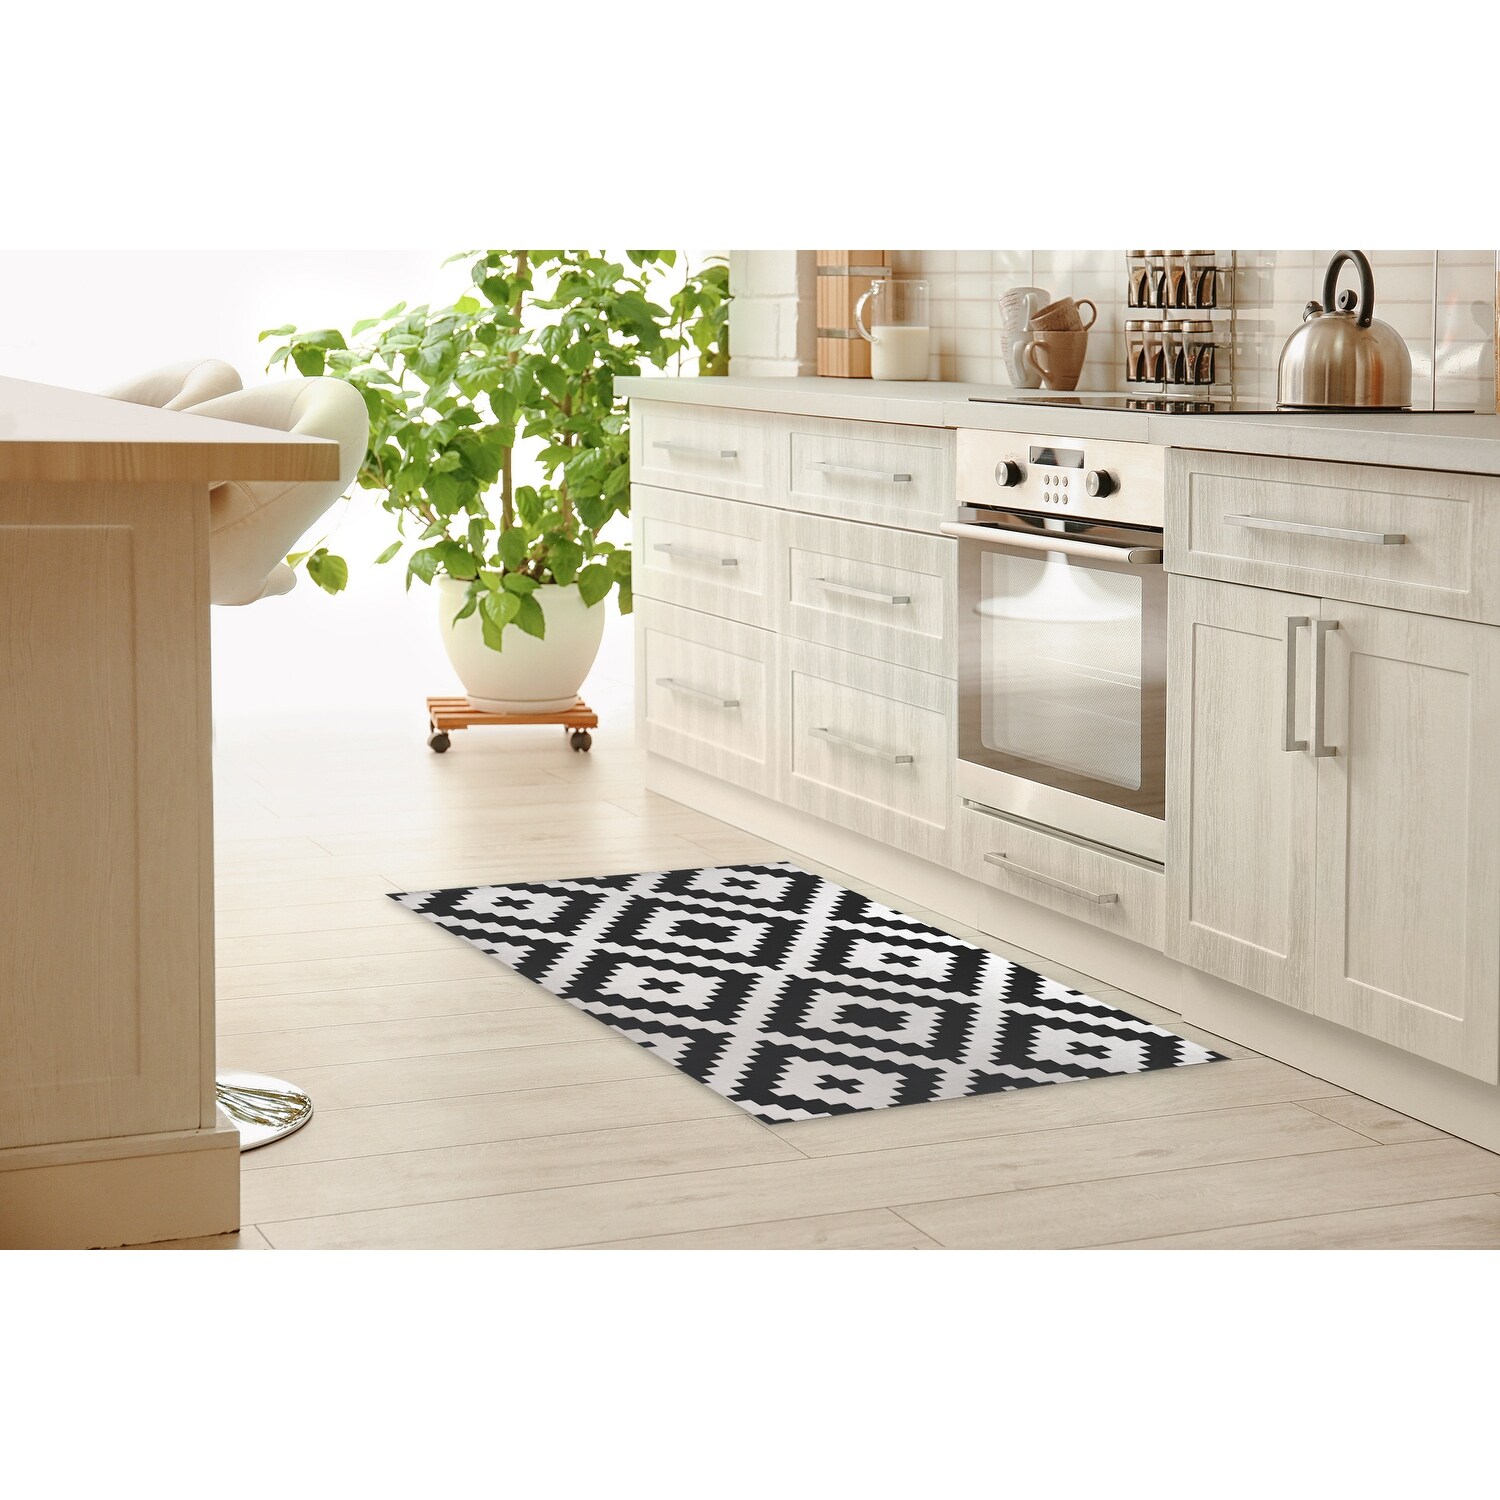 https://ak1.ostkcdn.com/images/products/is/images/direct/ab16b2b4a0511b40e6a23b1d669c0fc762eab7f2/KILIM-TARGET-BW-Kitchen-Mat-By-Becky-Bailey.jpg